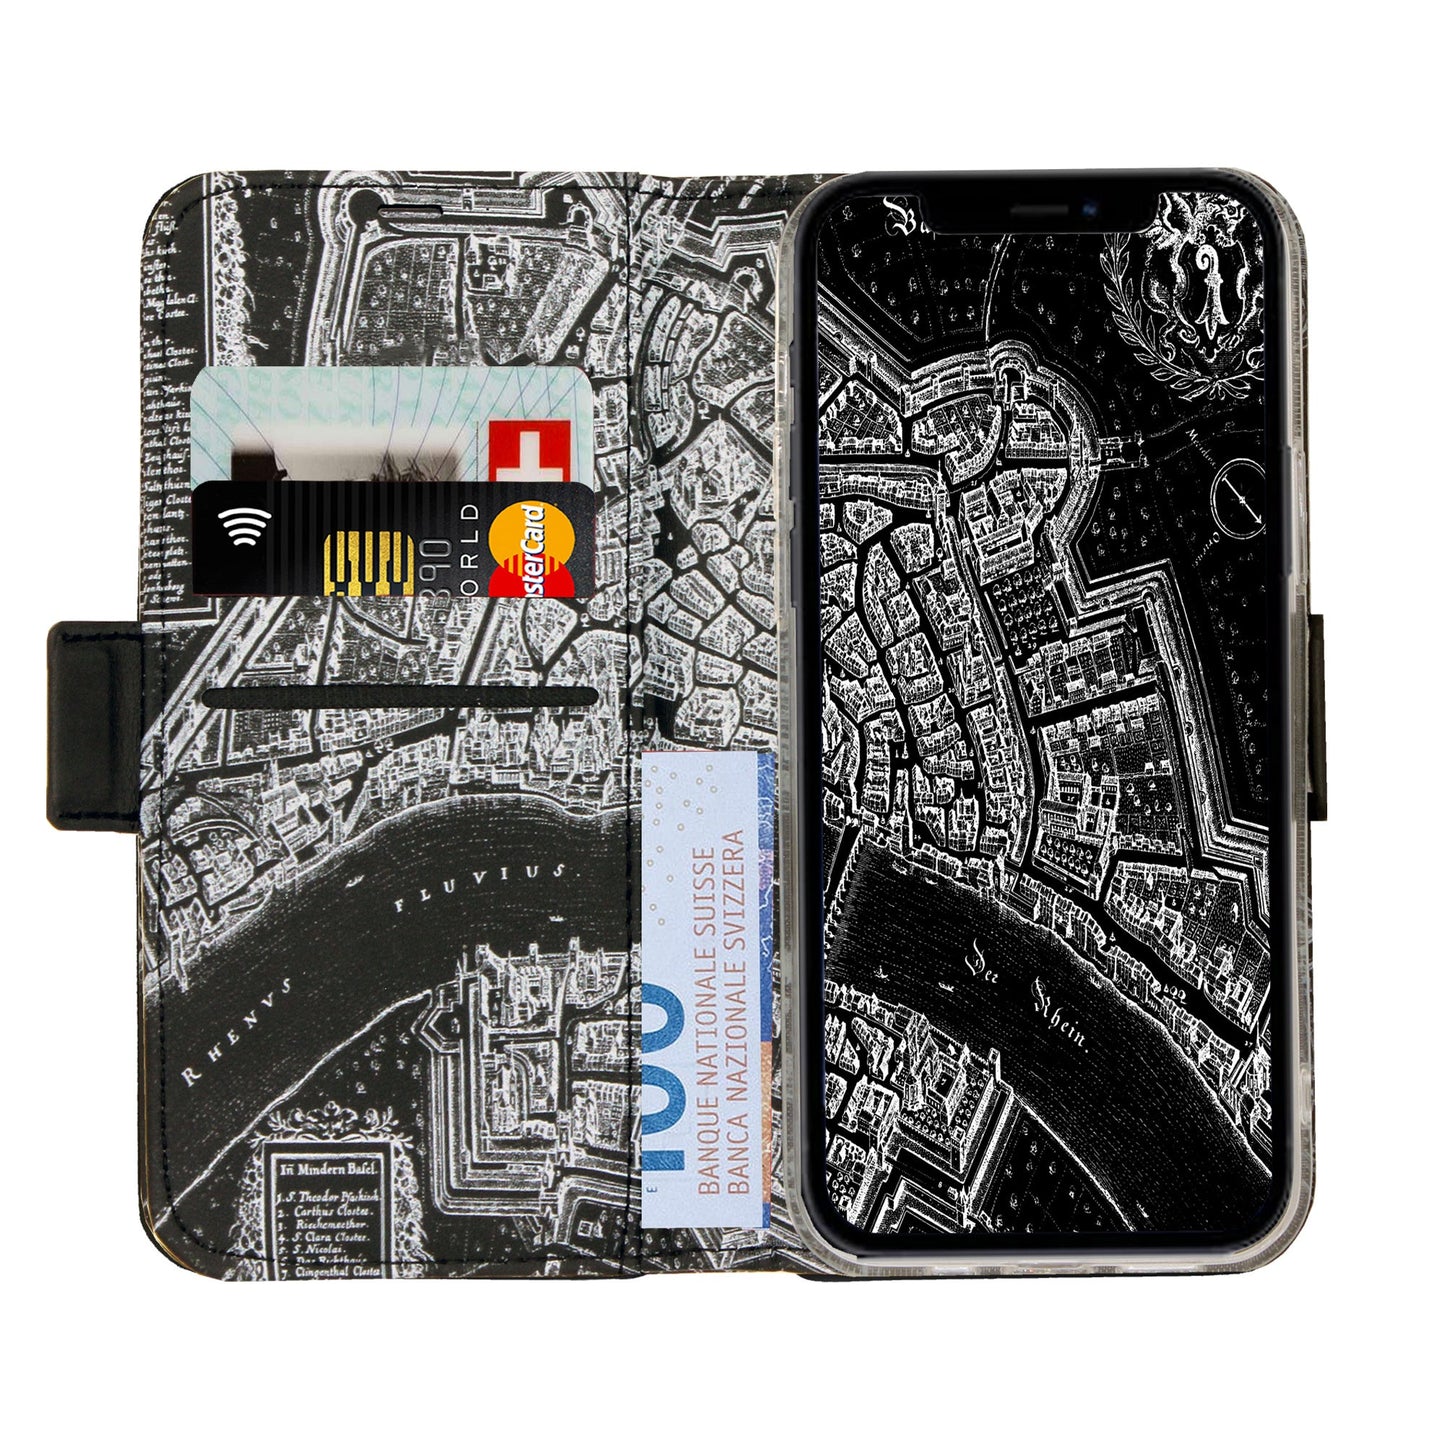 Basel Merian Negative Victor Case for iPhone 11